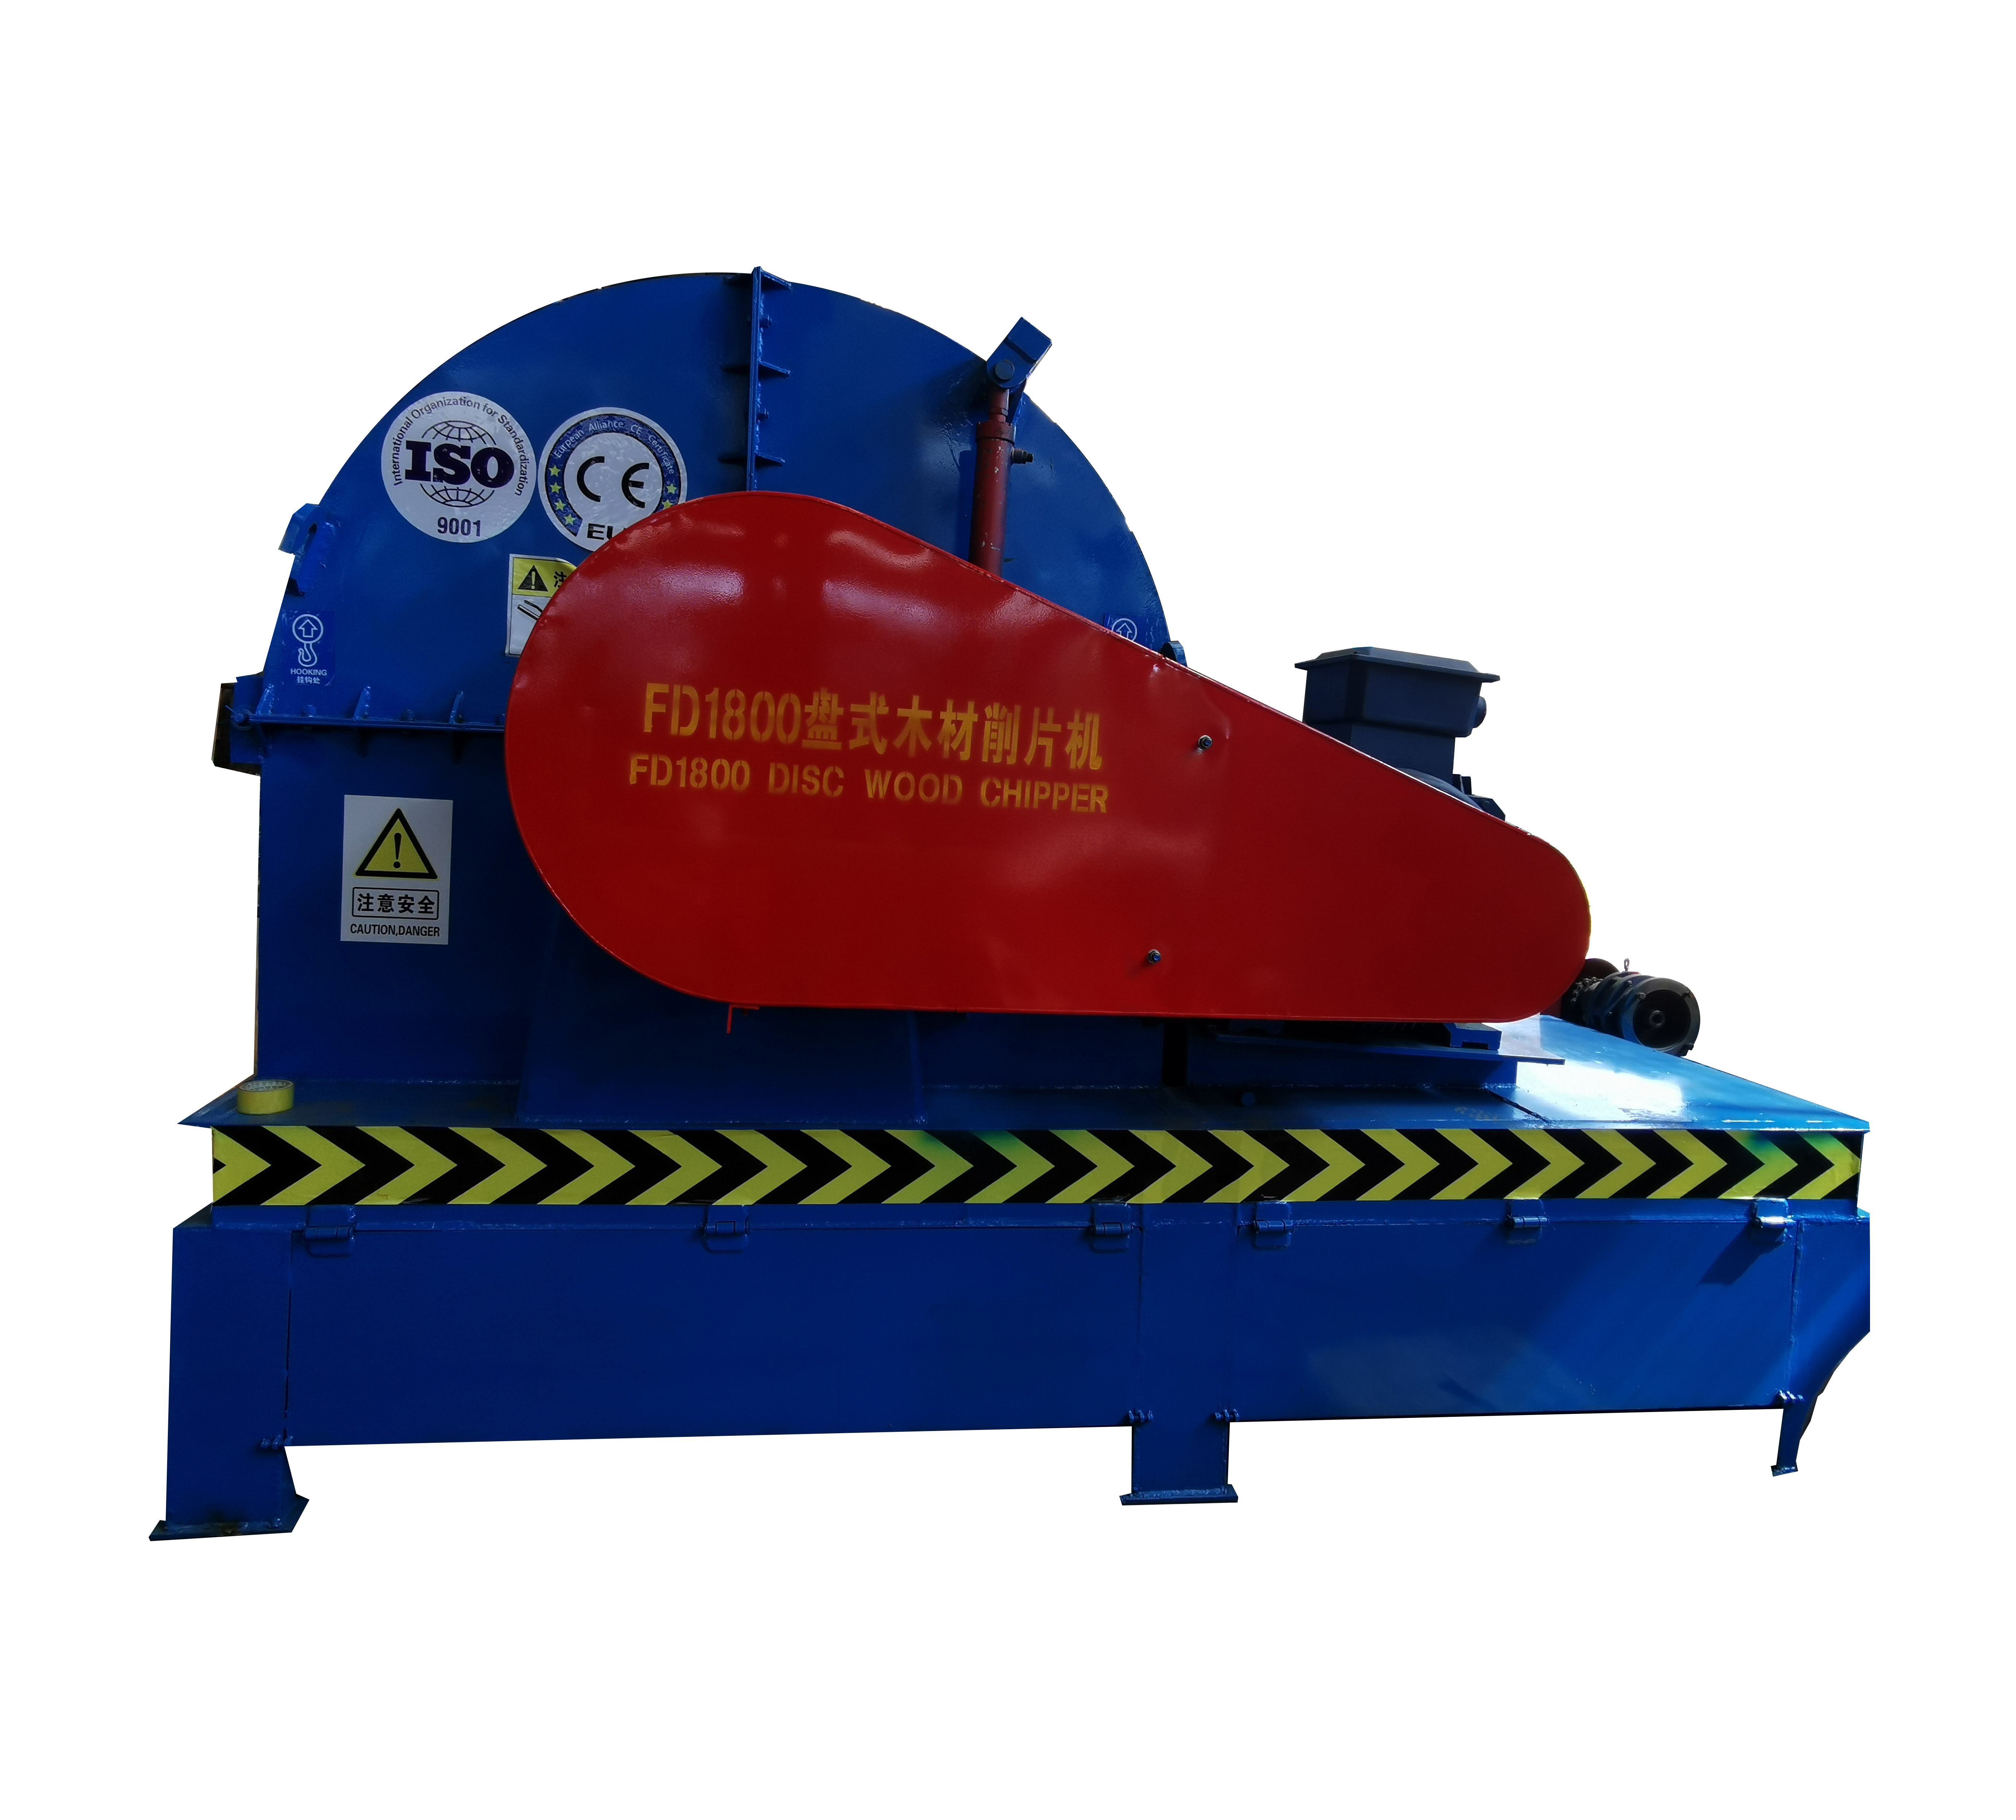 Disc Wood Chipper FD1800 Good Quality Wood Chips For Paper Pulp Featured Image